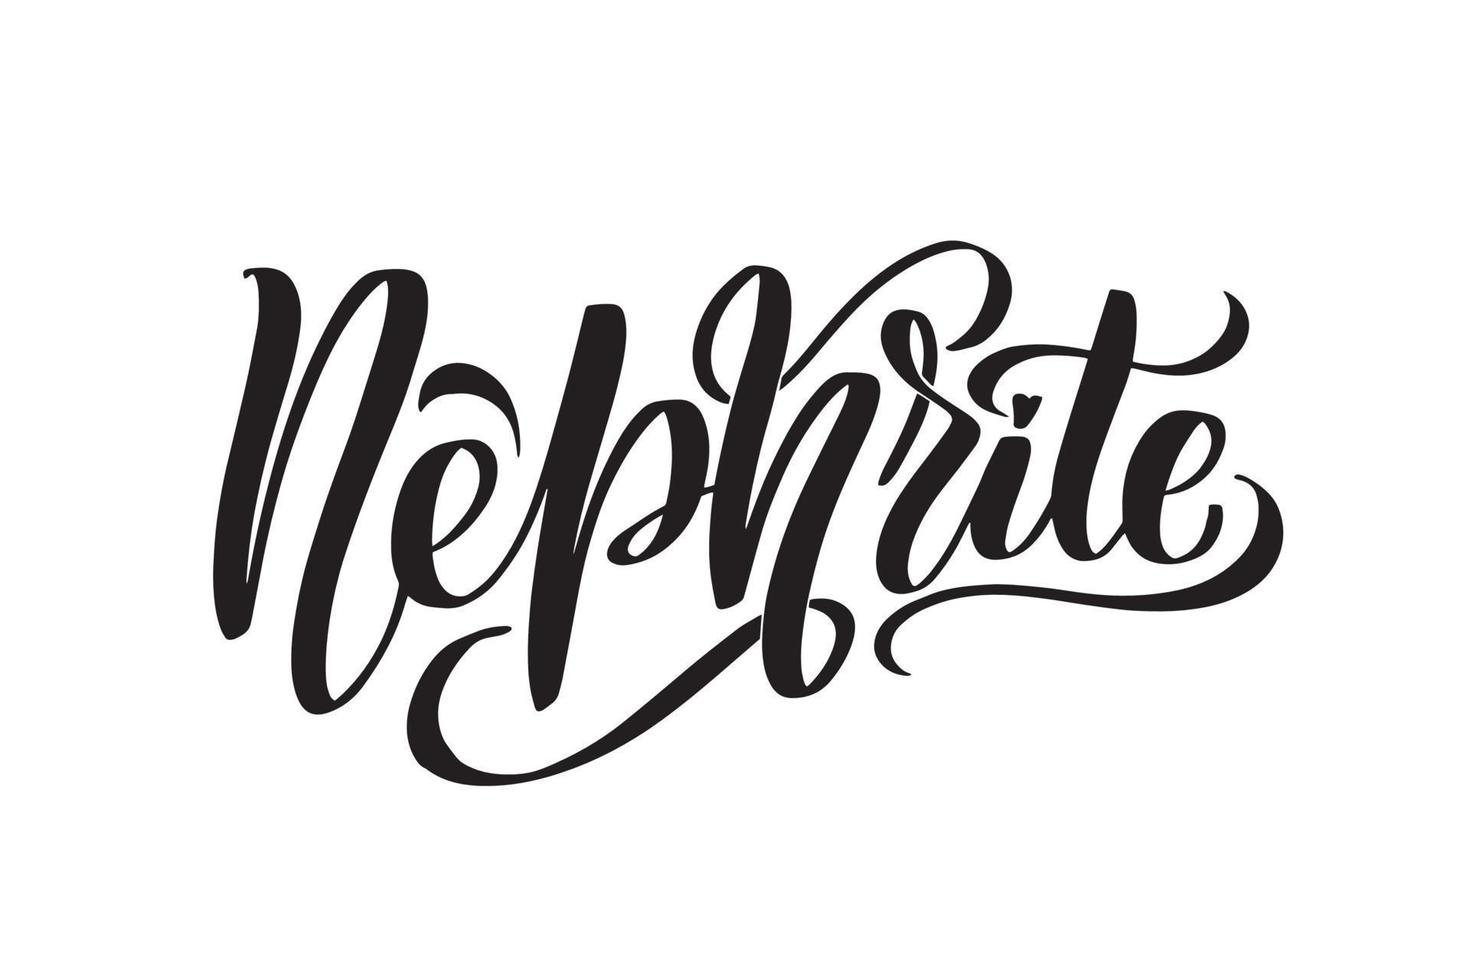 Nephrite. Inspirational handwritten brush lettering. Vector calligraphy stock illustration isolated on white background. Typography for banners, badges, postcard, tshirt, prints.